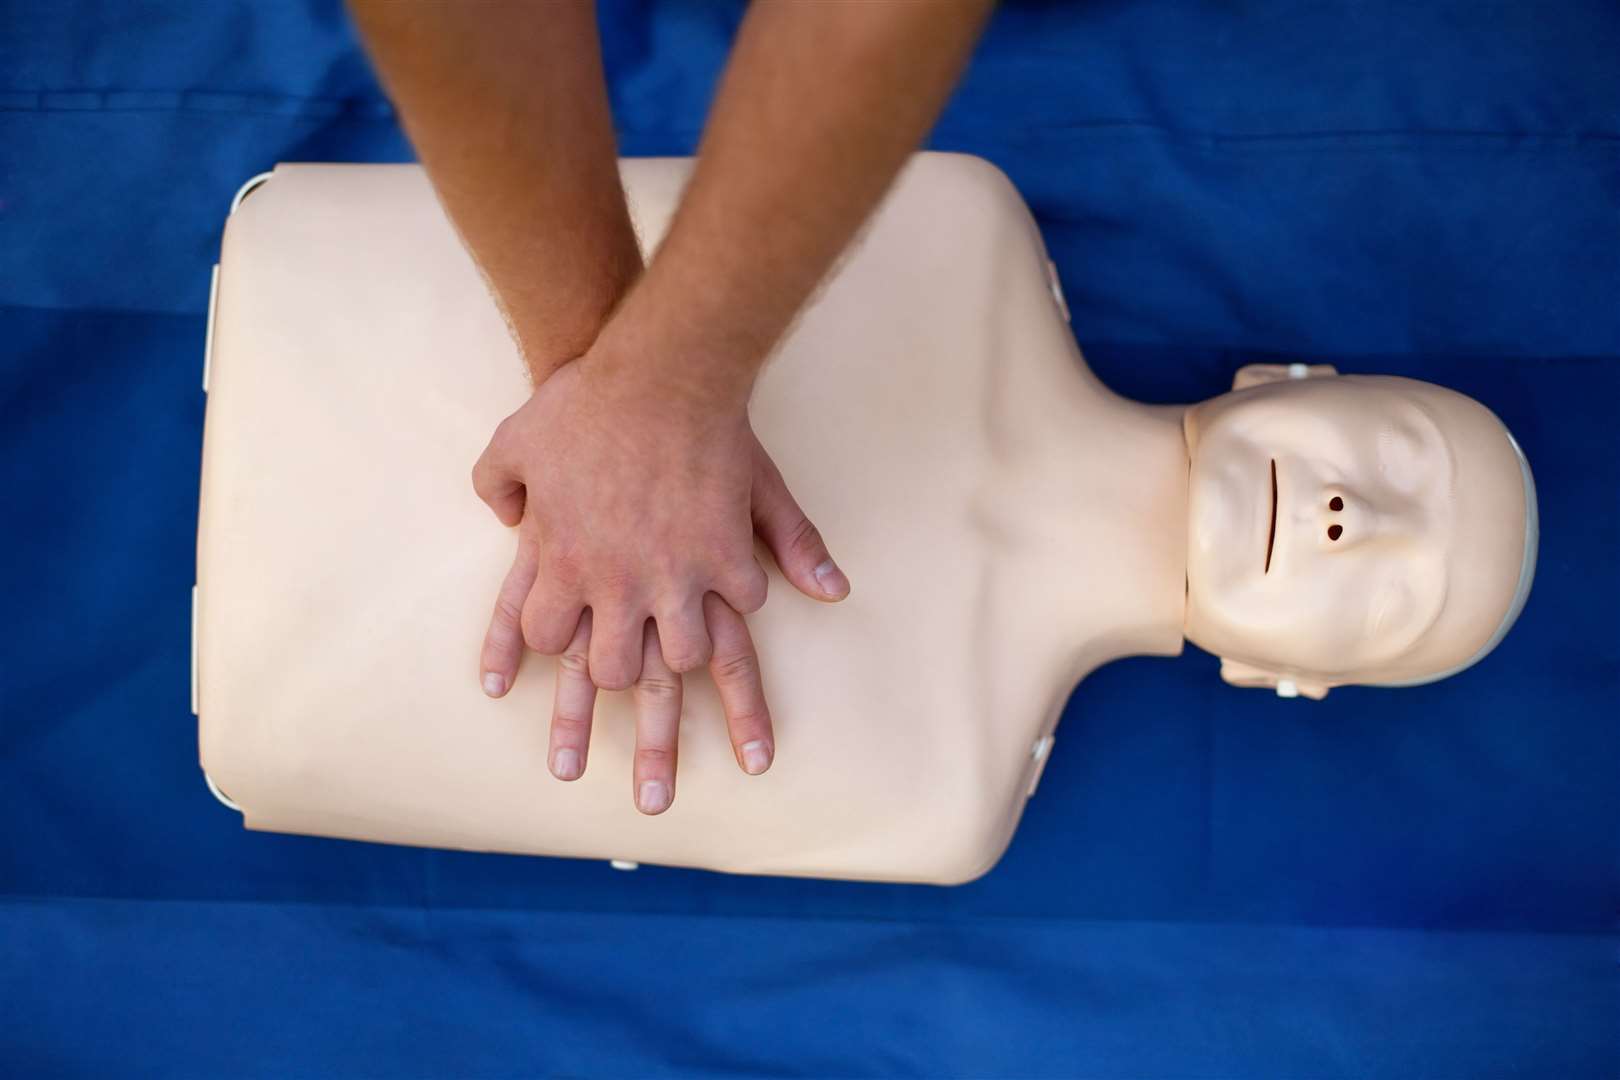 More and more students are now being taught first aid as part of lessons. Photo: iStock.